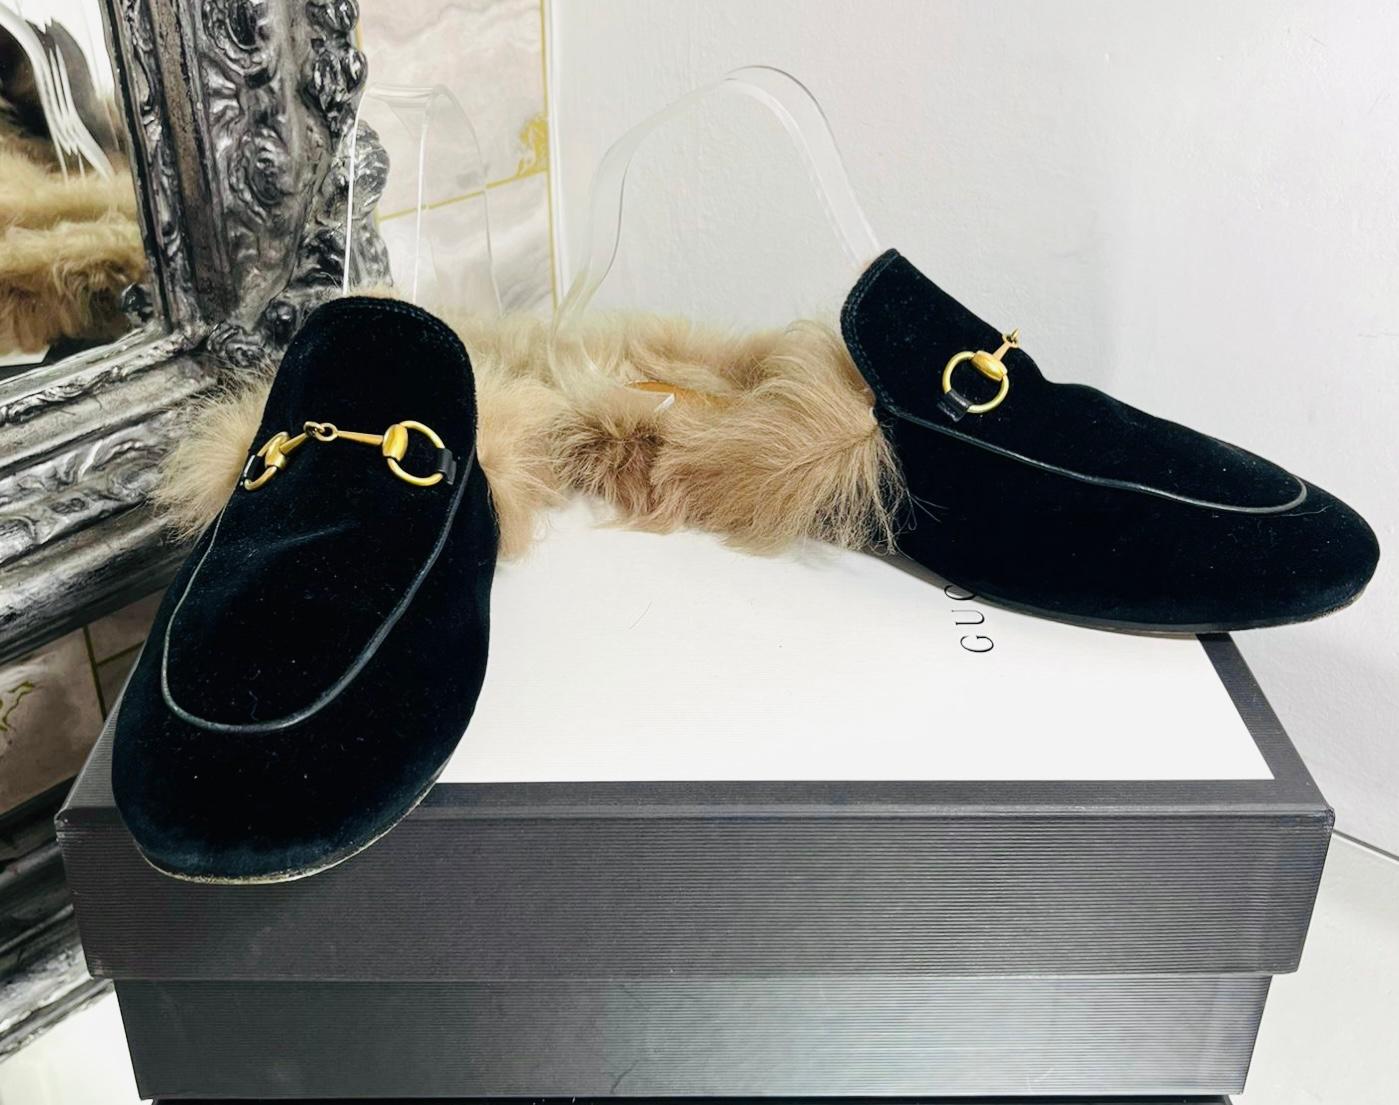 Gucci Princetown Suede Shearling-Lined Mules

Black slip-on mules designed with the brand's signature gold Horsebit embellishment to the front.

Detailed with shearling lining, almond toes and flat leather soles.

Size – 40

Condition – Very